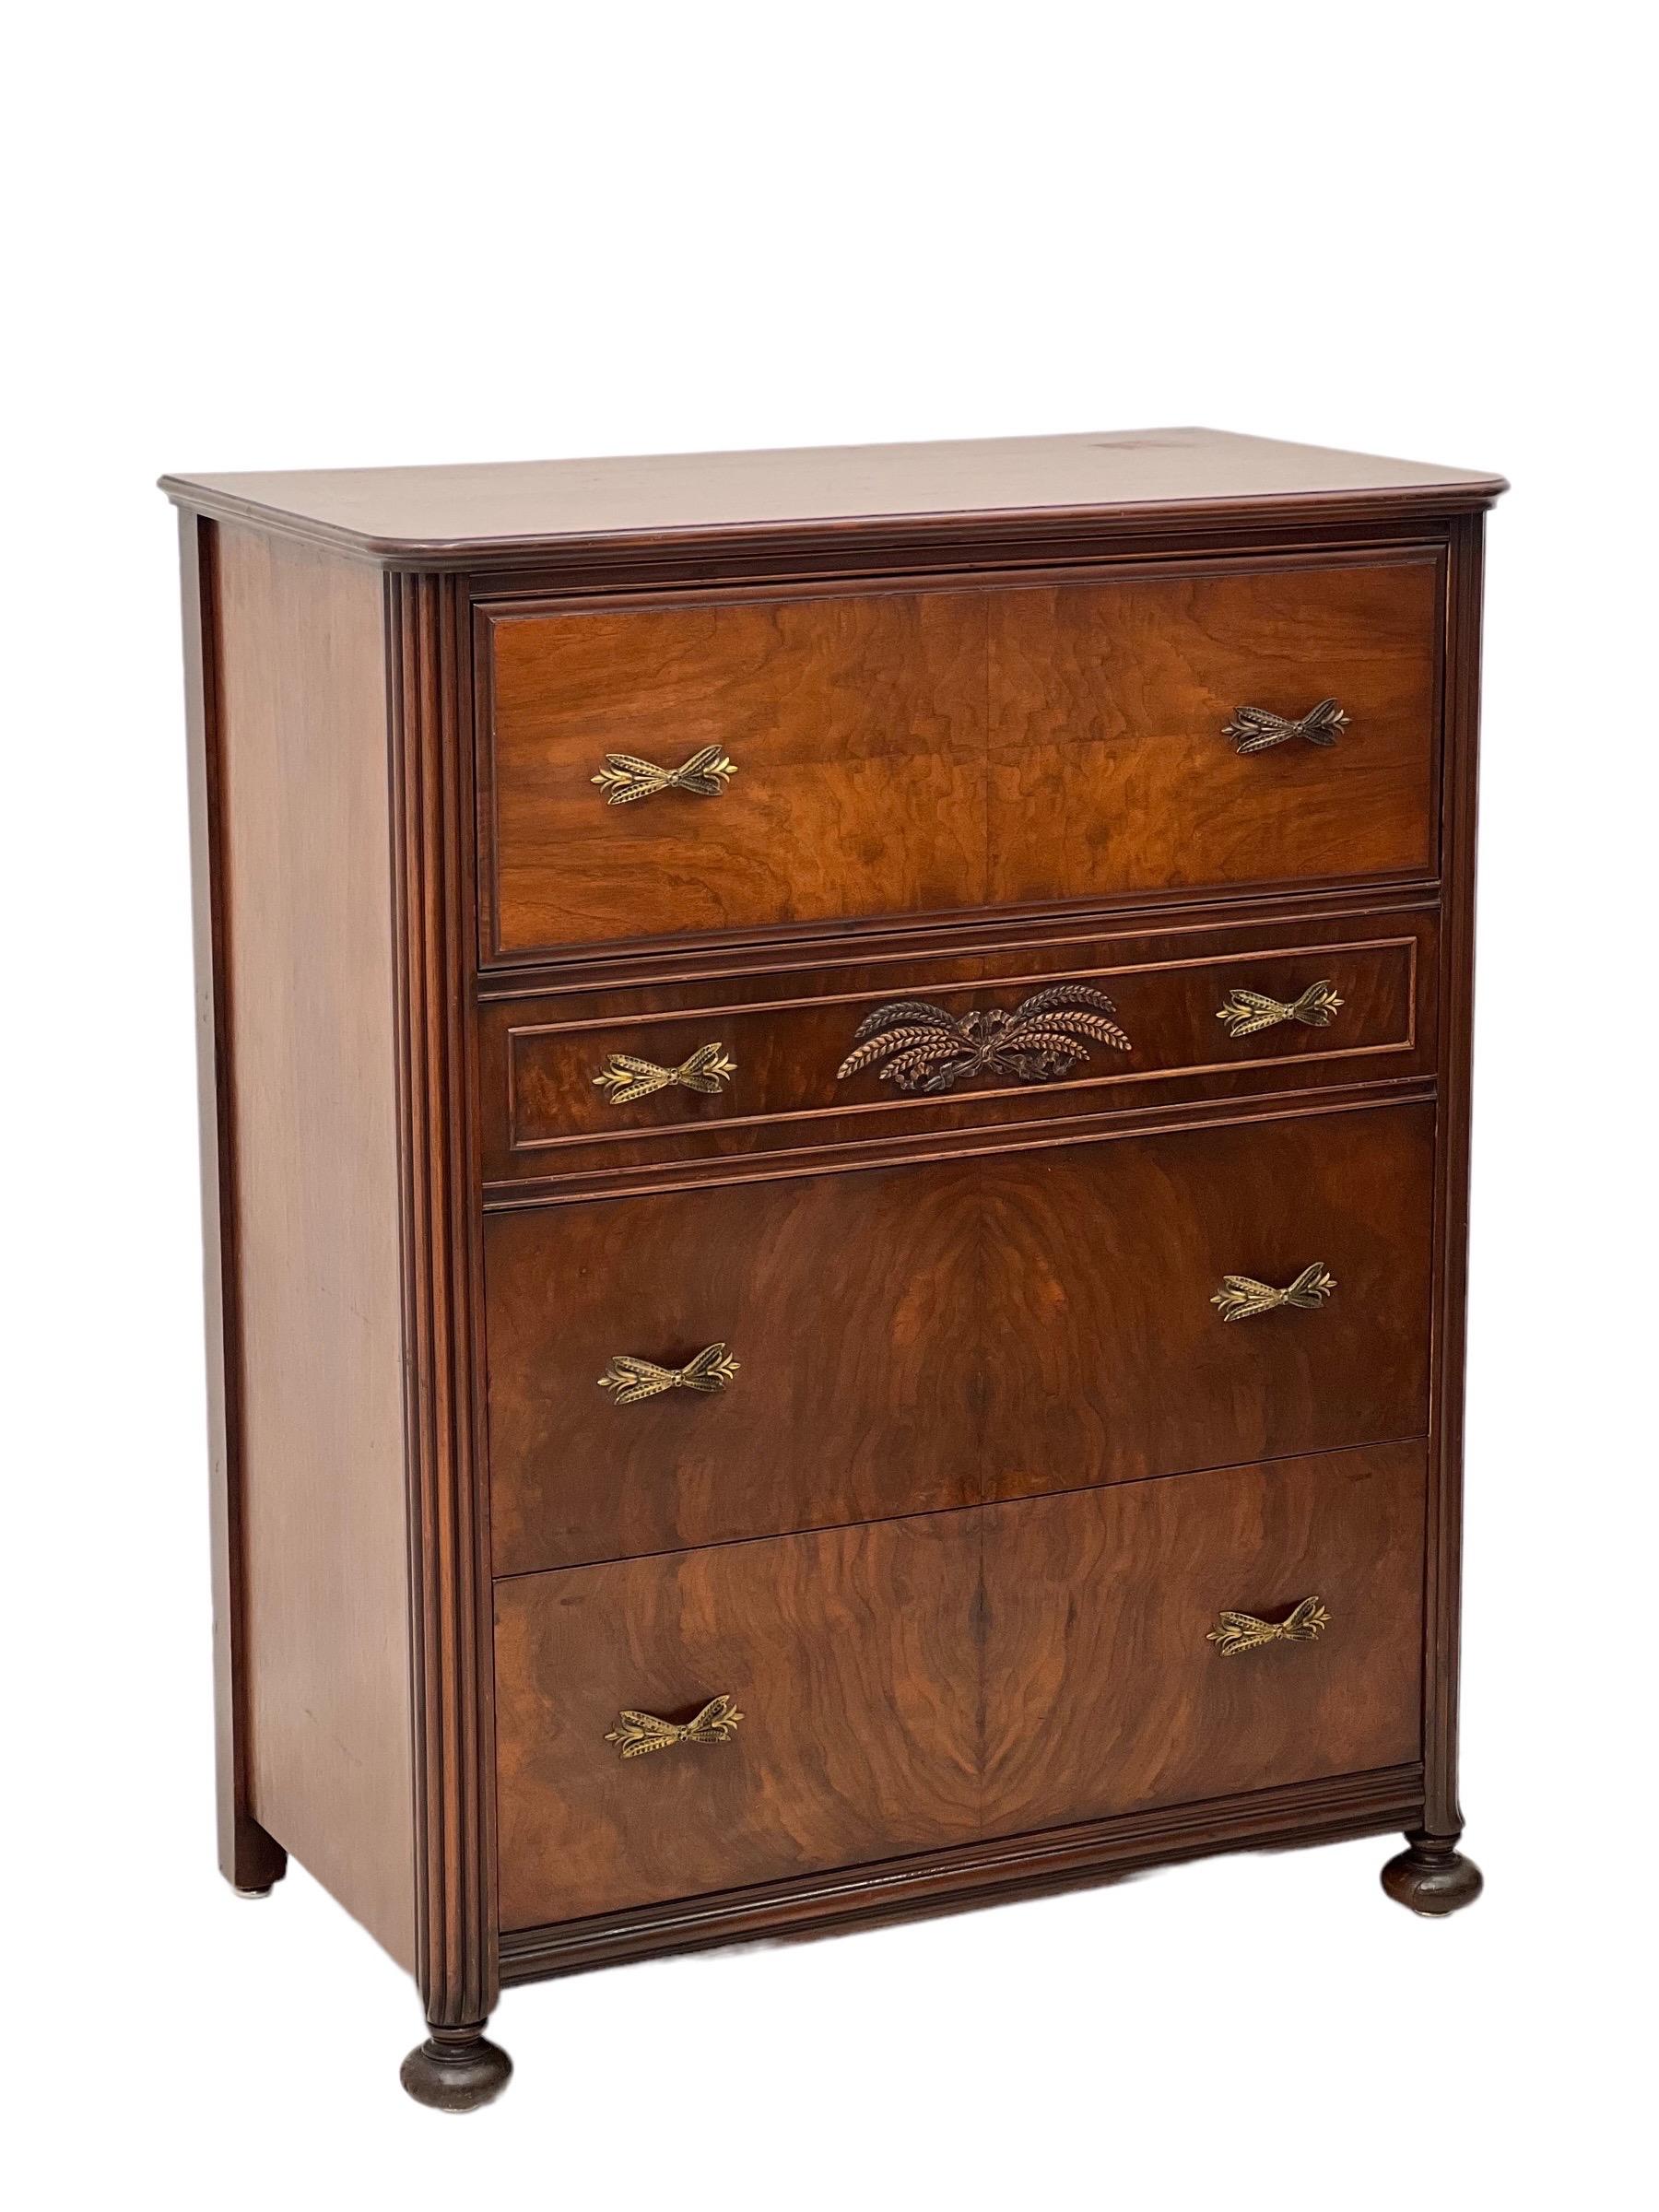 Vintage Regency Style Walnut and Mahogany Burl Wood Dresser In Good Condition For Sale In Seattle, WA